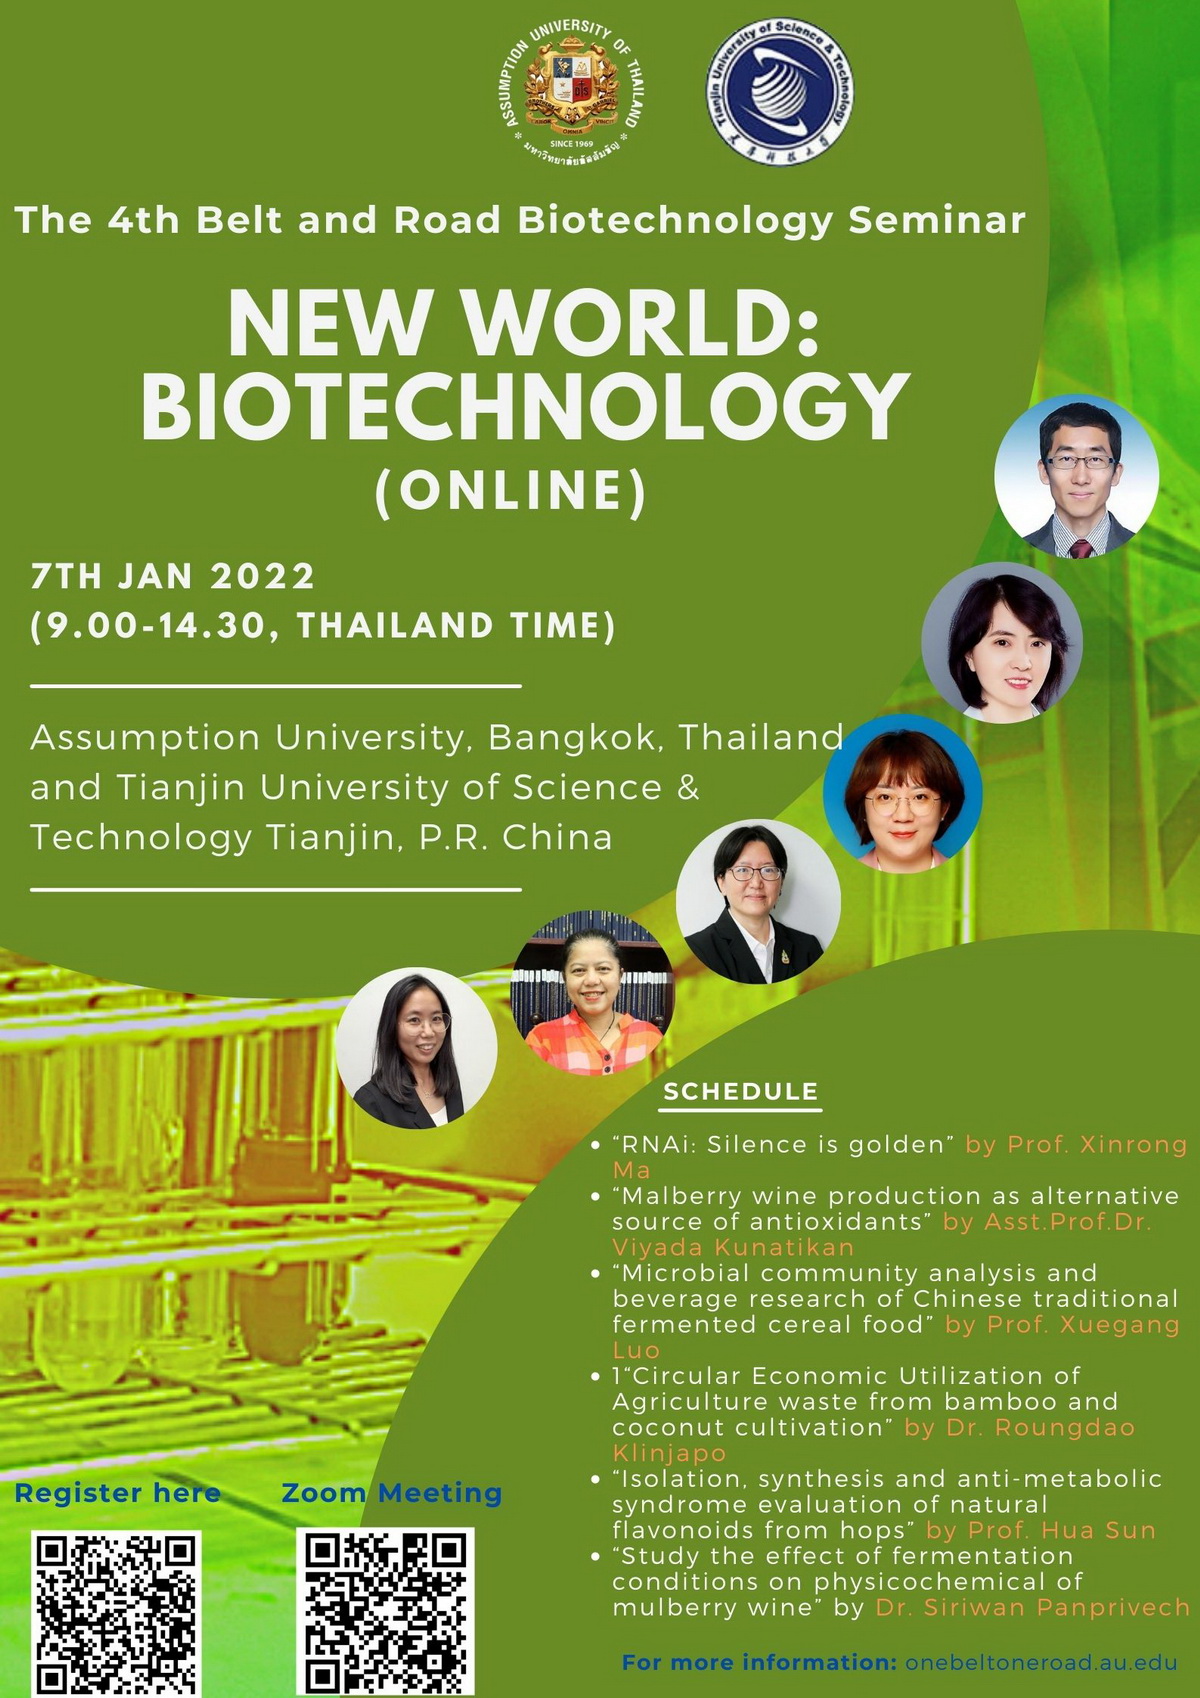 The 4th Belt and Road Biotechnology Seminar “New World: Biotechnology” (Online)